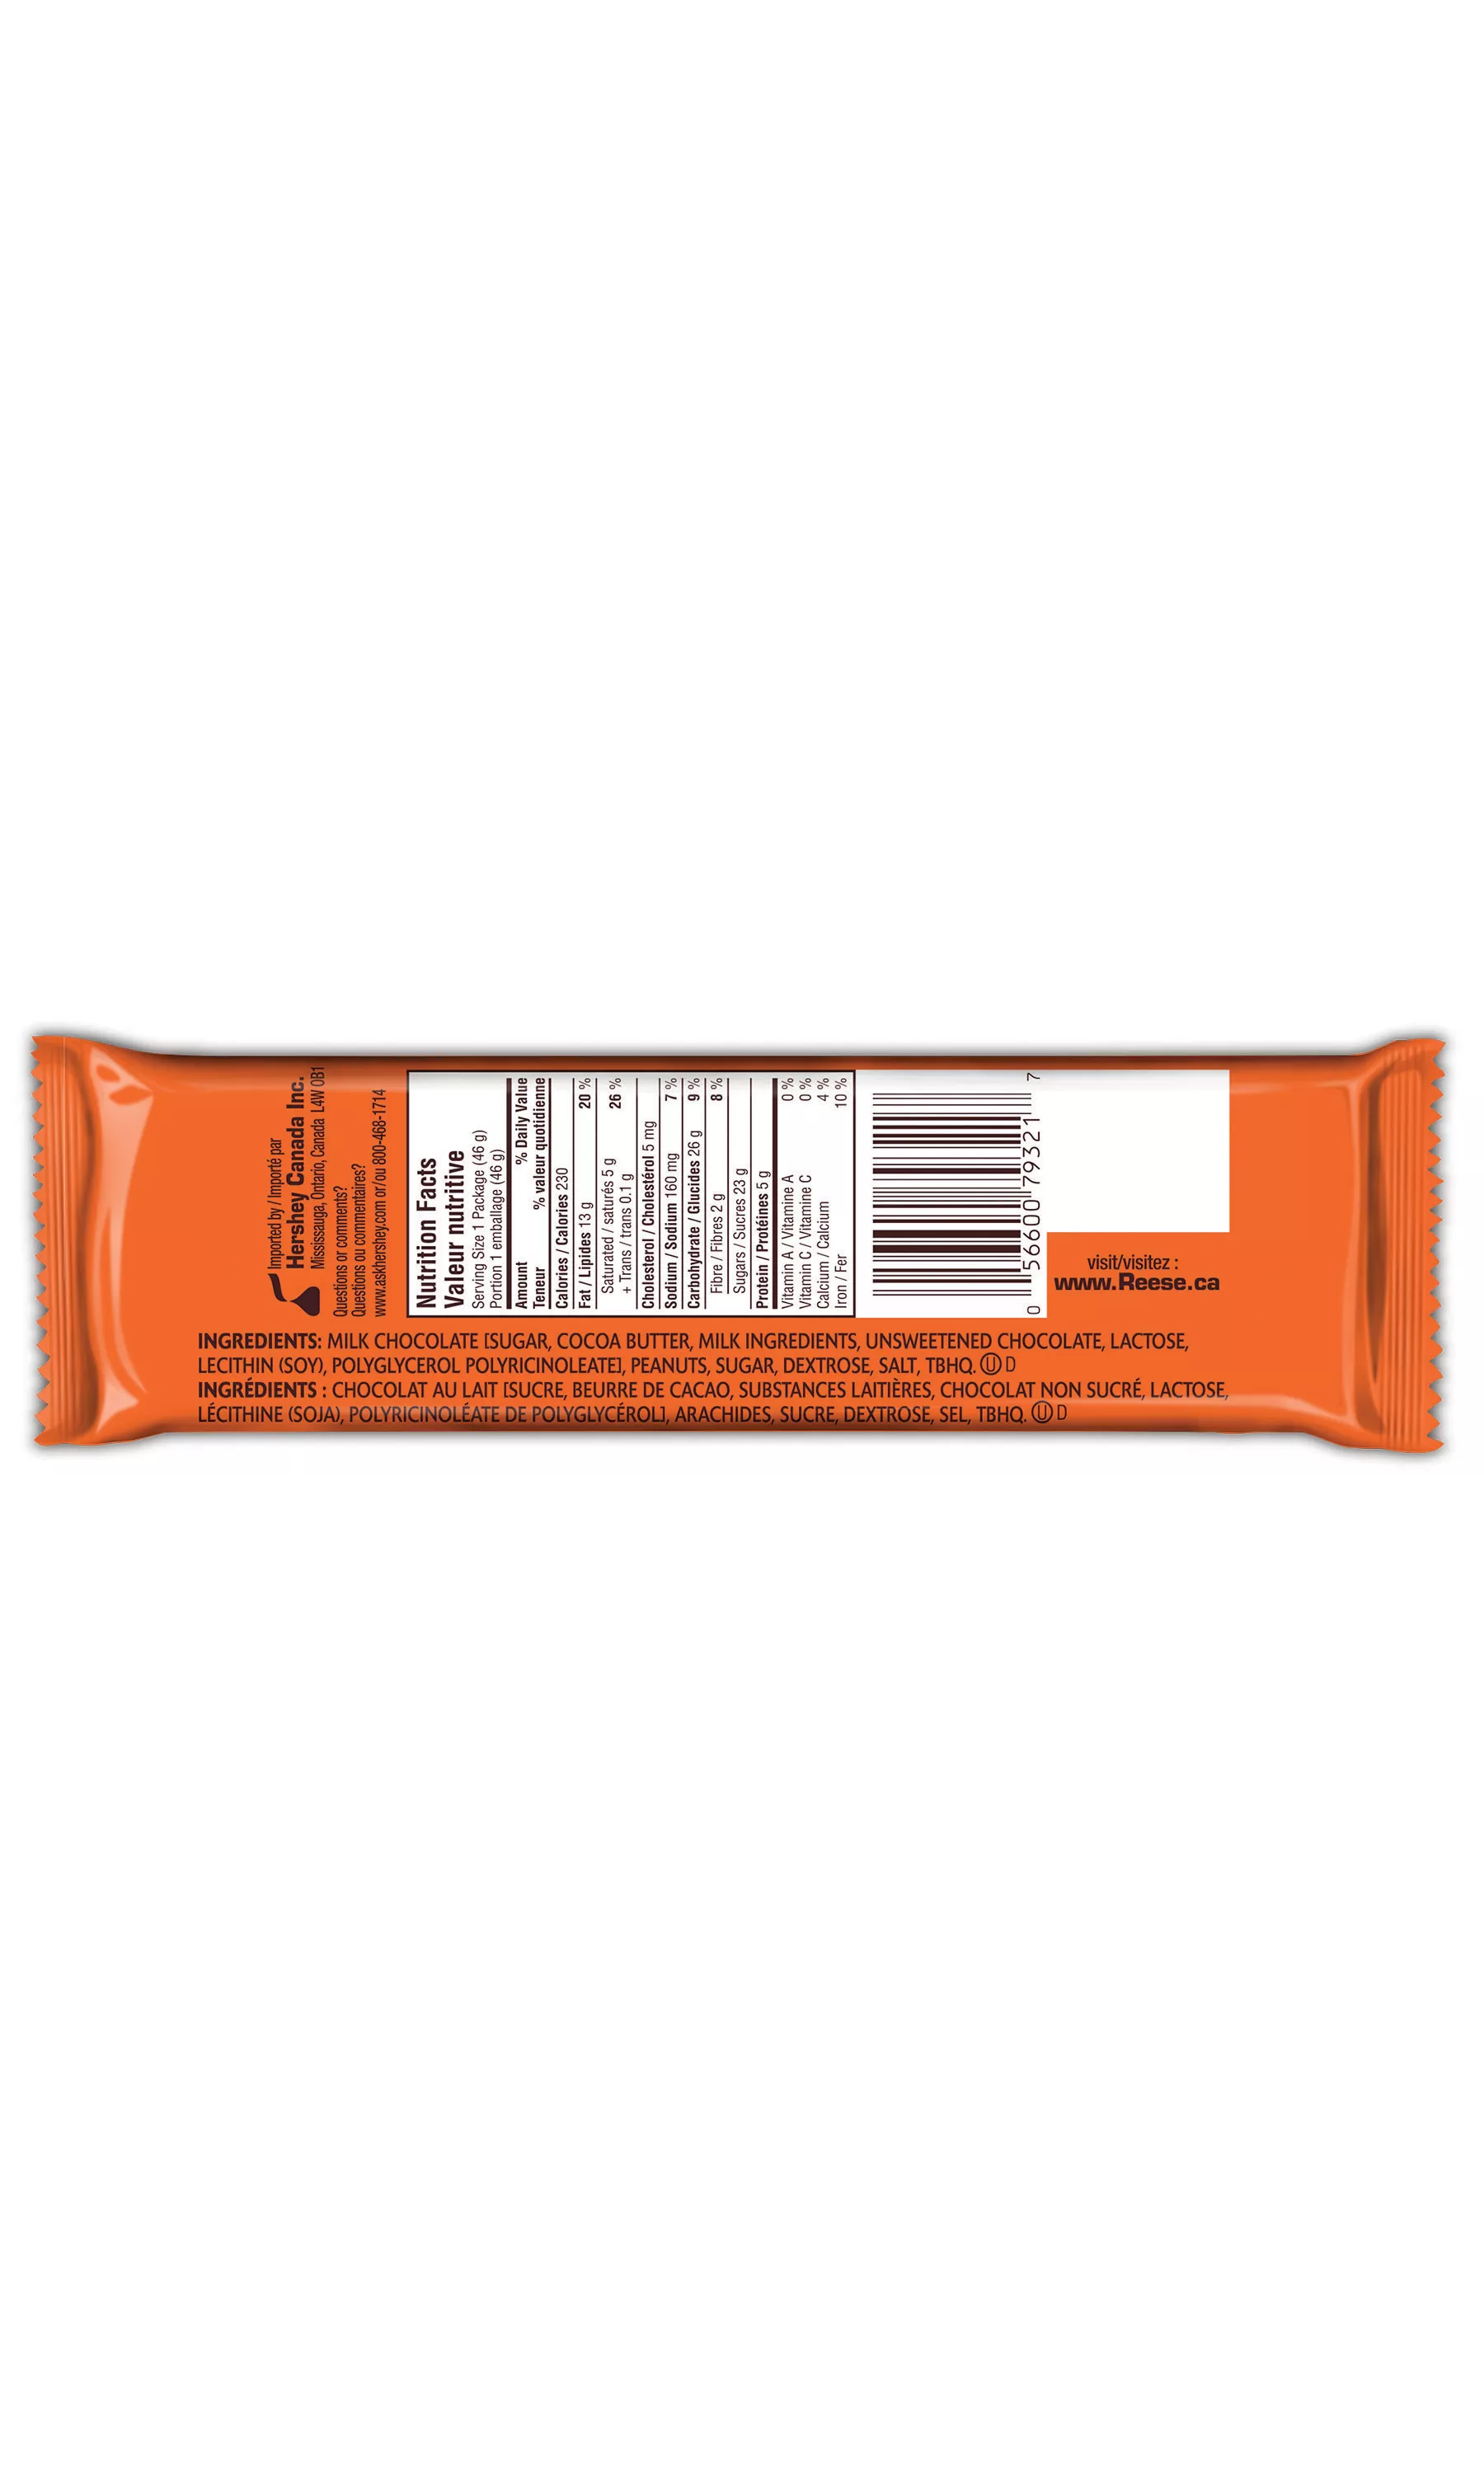 REESE'S PEANUT BUTTER CUPS Candy, 46g - Back of package